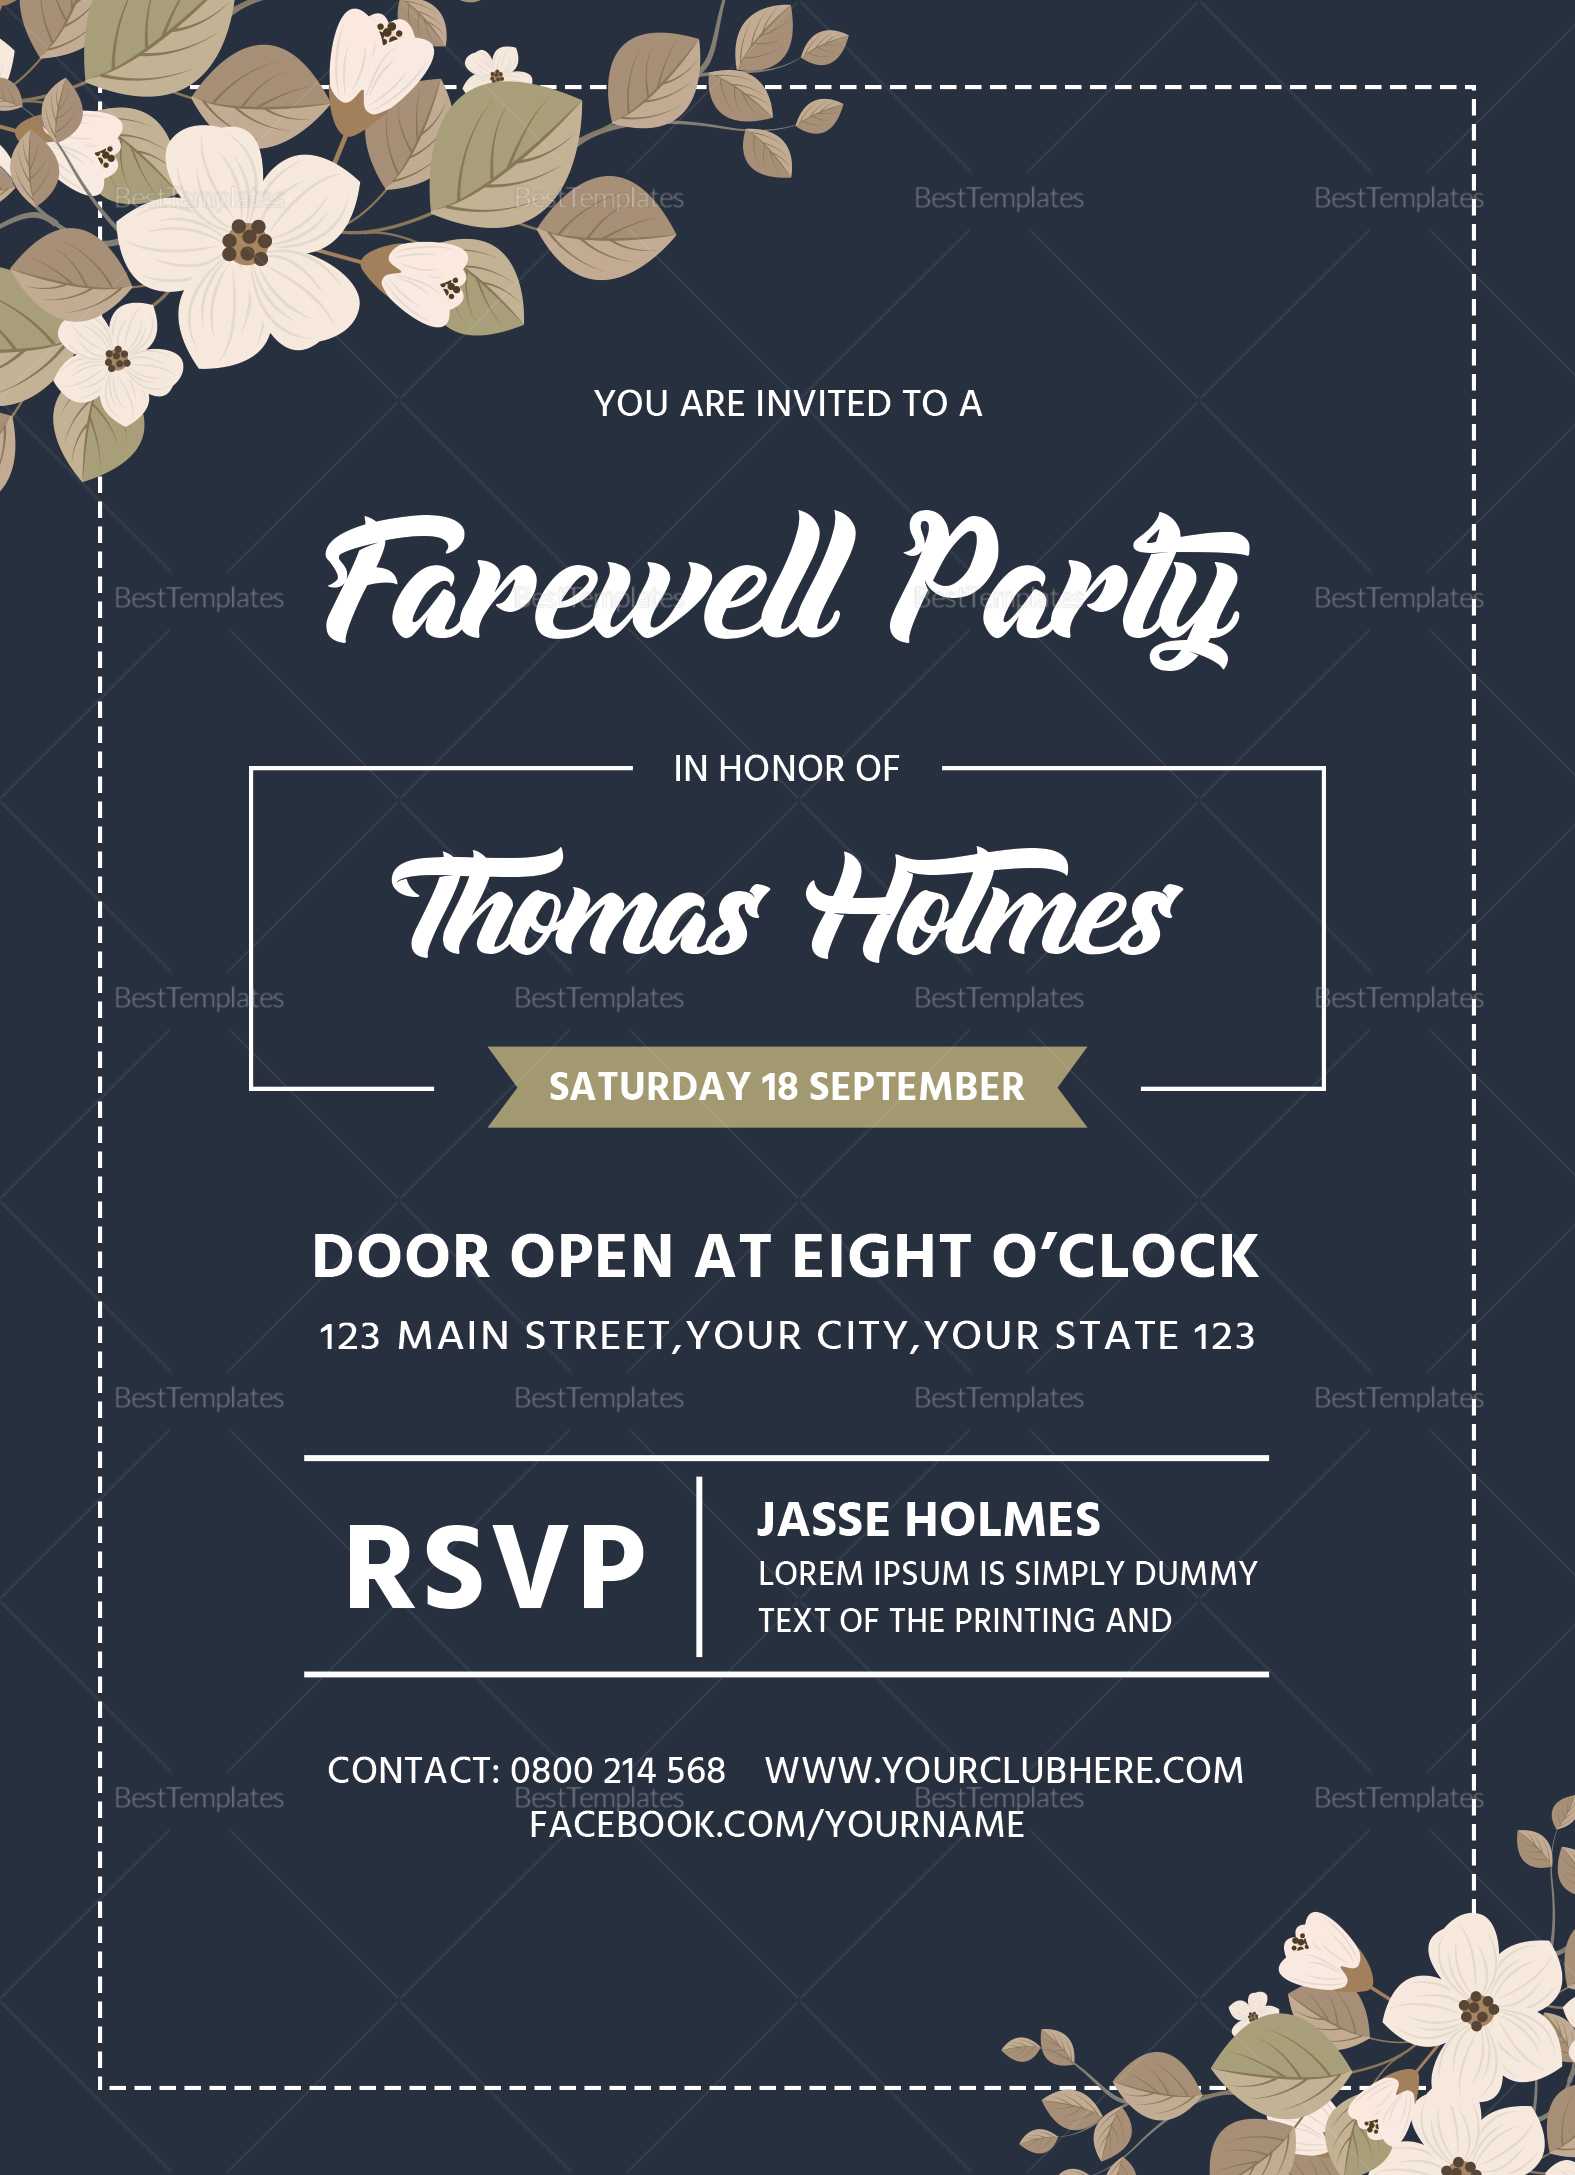 Farewell Party Invitation Card Template Inside Farewell Invitation Card Template